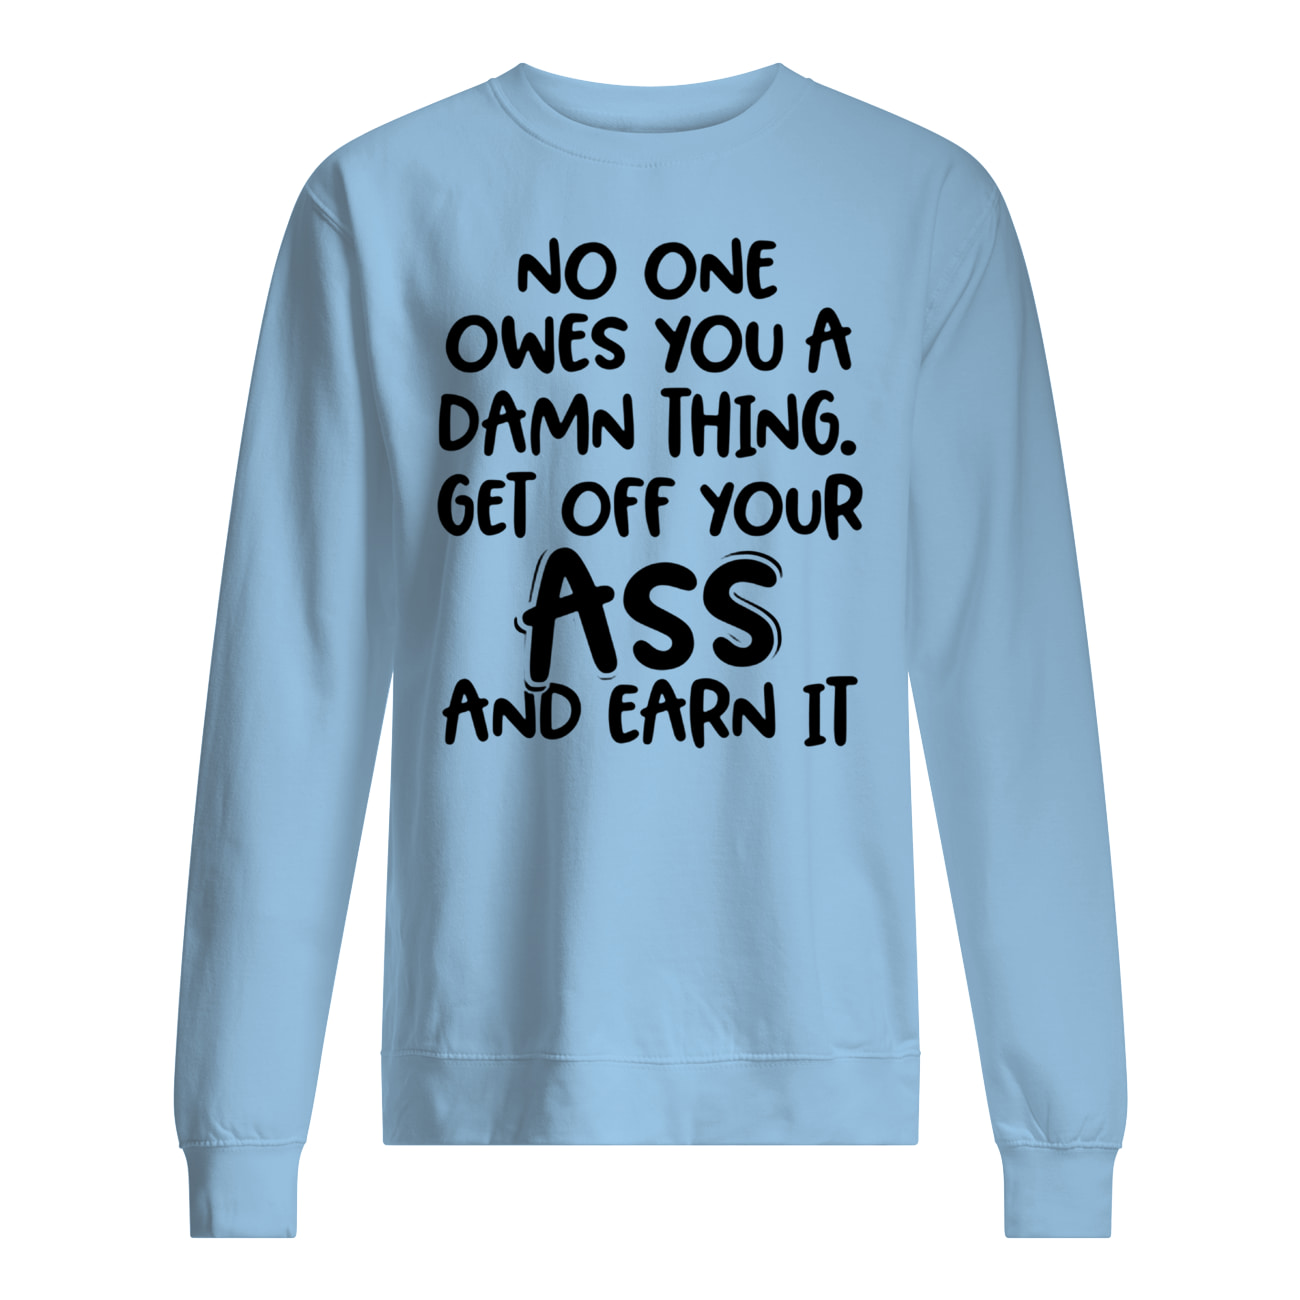 No one owes you a damn thing get off your ass and earn it sweatshirt